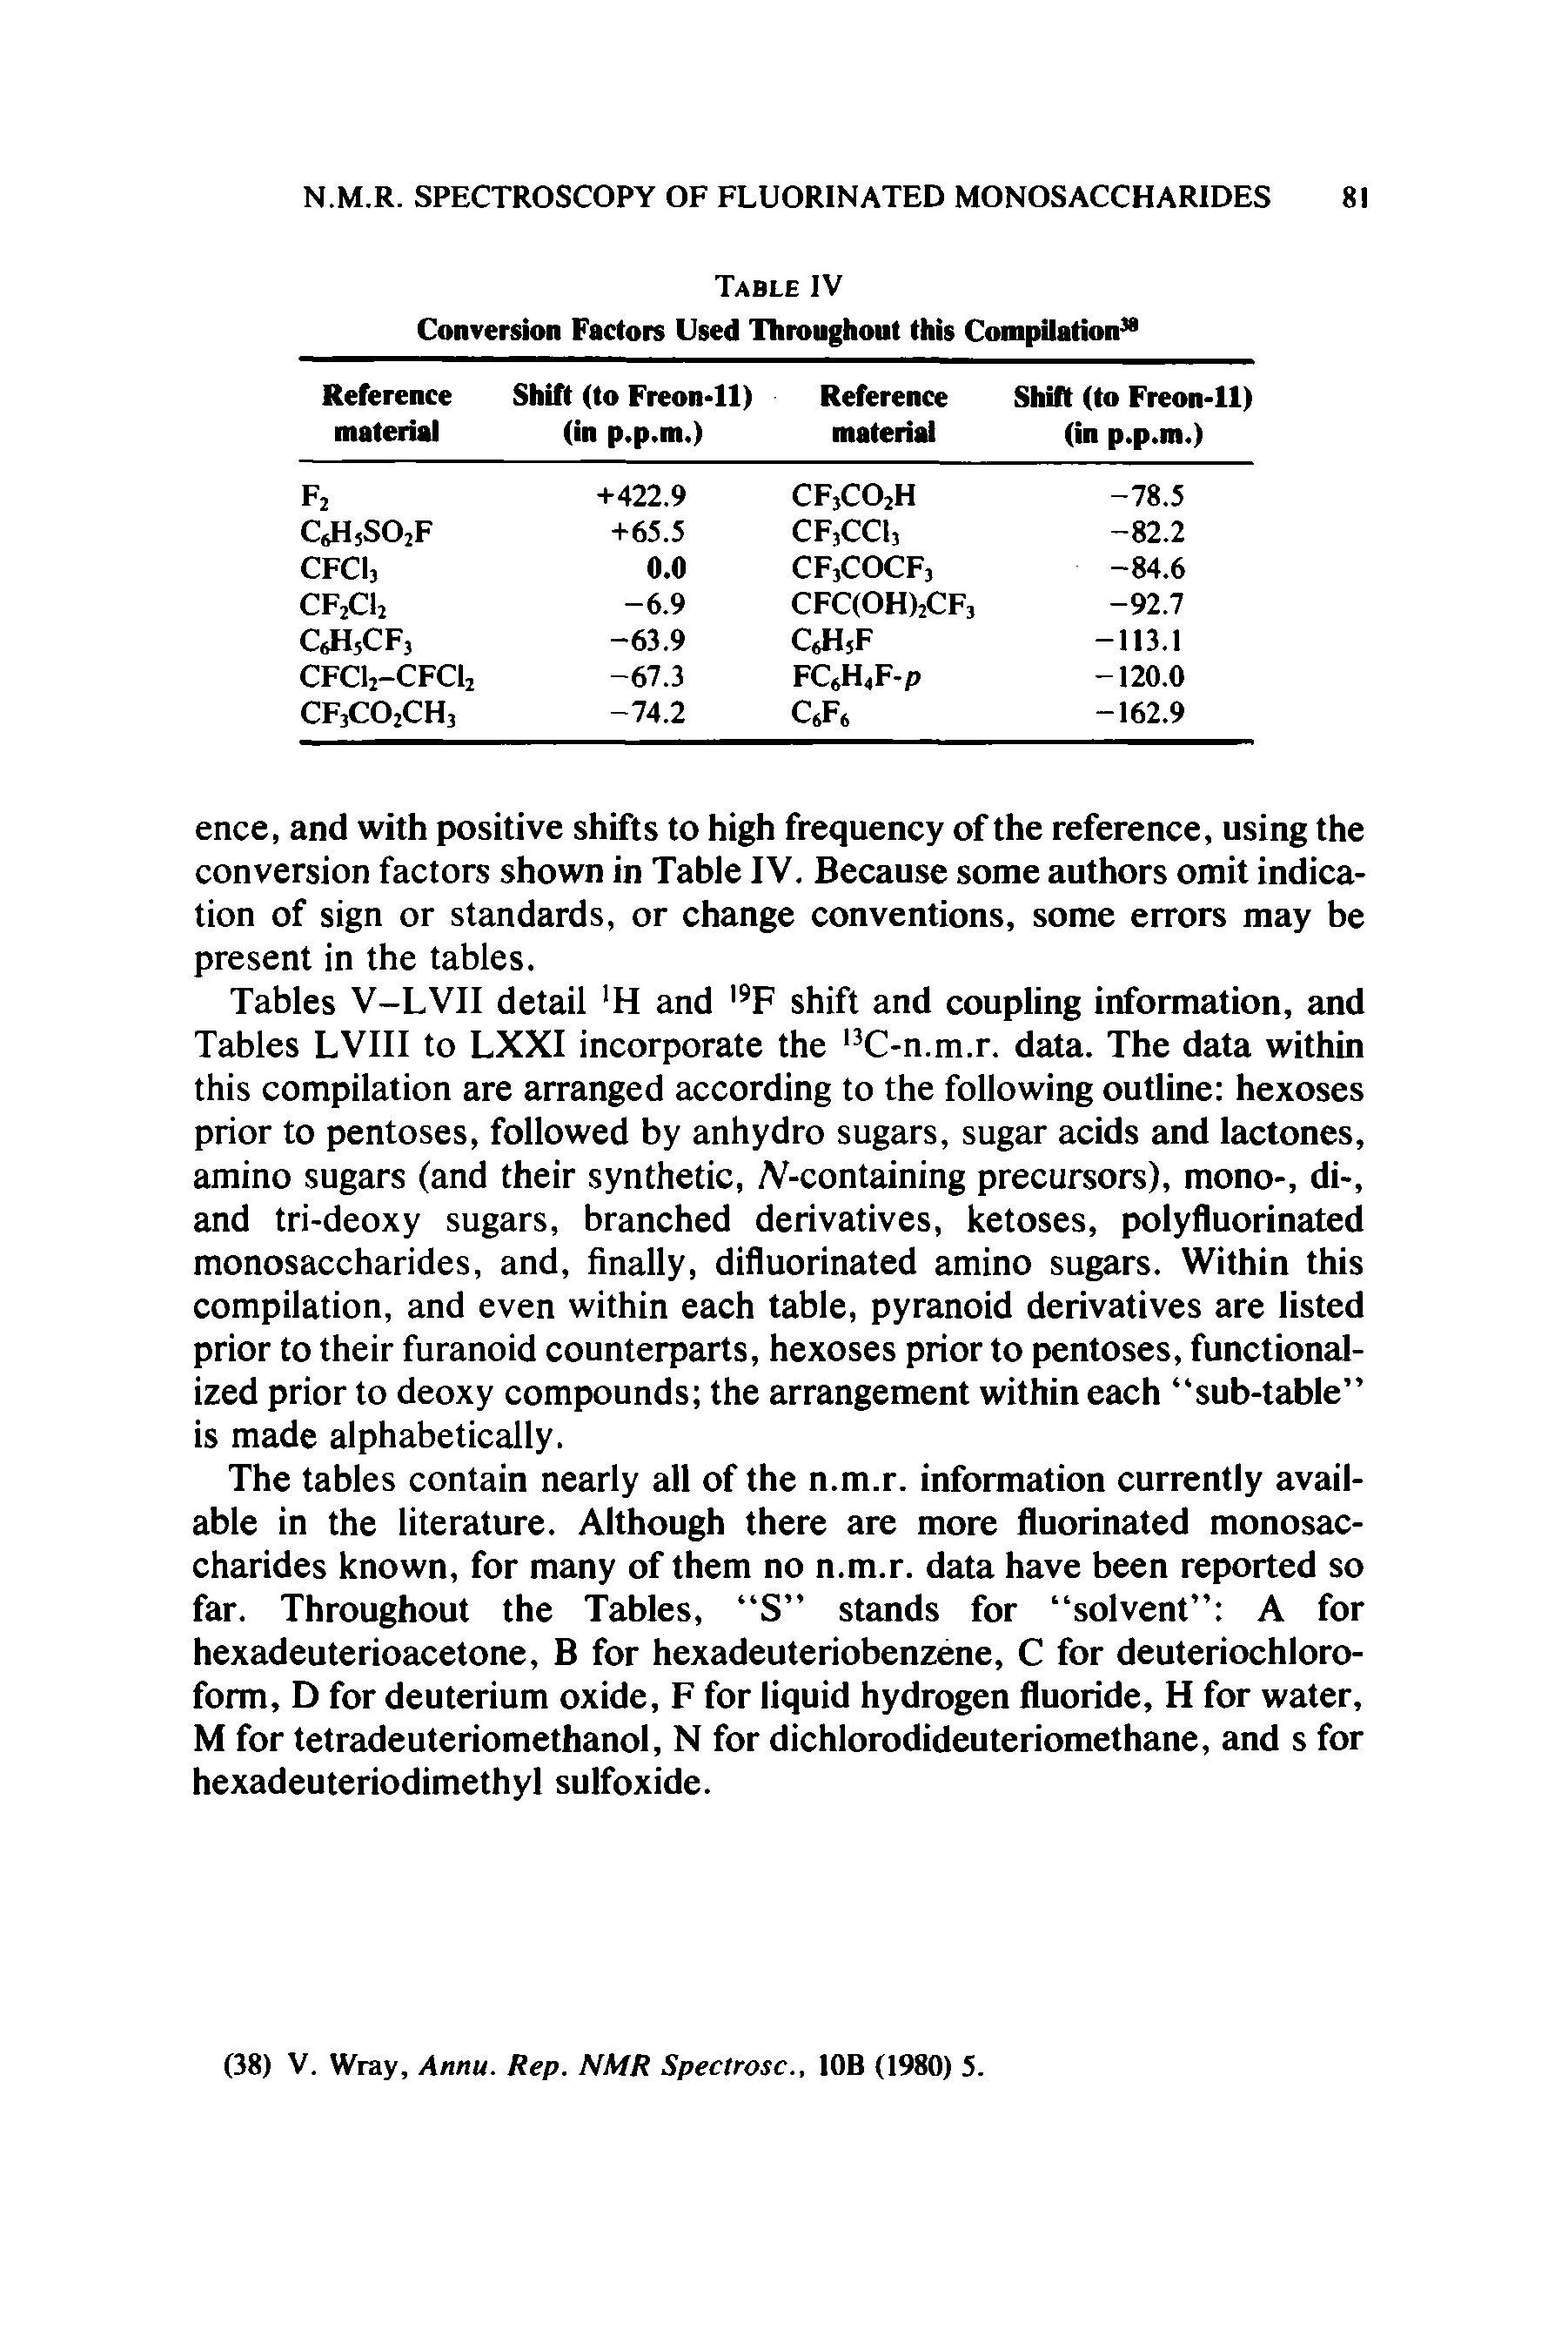 Tables V-LVII detail H and F shift and coupling information, and Tables LVIII to LXXI incorporate the C-n.m.r. data. The data within this compilation are arranged according to the following outline hexoses prior to pentoses, followed by anhydro sugars, sugar acids and lactones, amino sugars (and their synthetic, A -containing precursors), mono-, di-, and tri-deoxy sugars, branched derivatives, ketoses, polyfluorinated monosaccharides, and, finally, difluorinated amino sugars. Within this compilation, and even within each table, pyranoid derivatives are listed prior to their furanoid counterparts, hexoses prior to pentoses, functionalized prior to deoxy compounds the arrangement within each sub-table is made alphabetically.